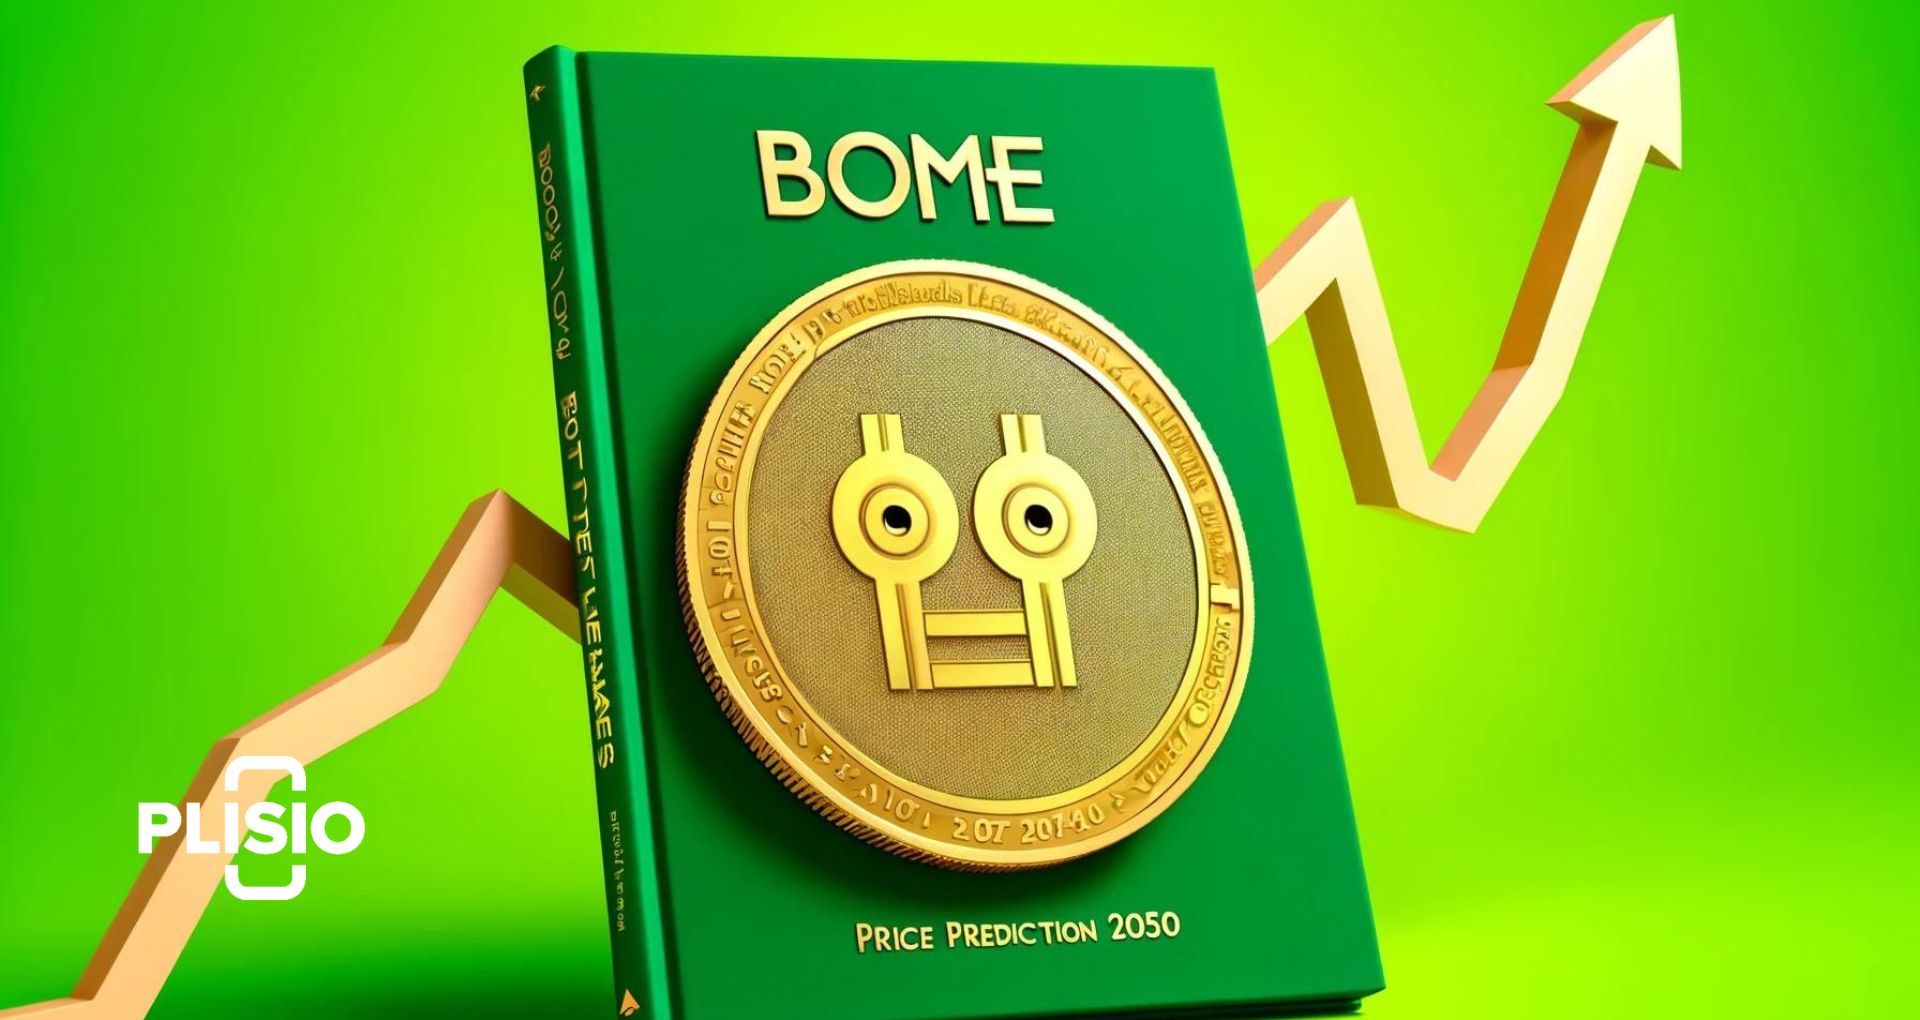 BOOK OF MEMES (BOME) 価格予測 2024-2050